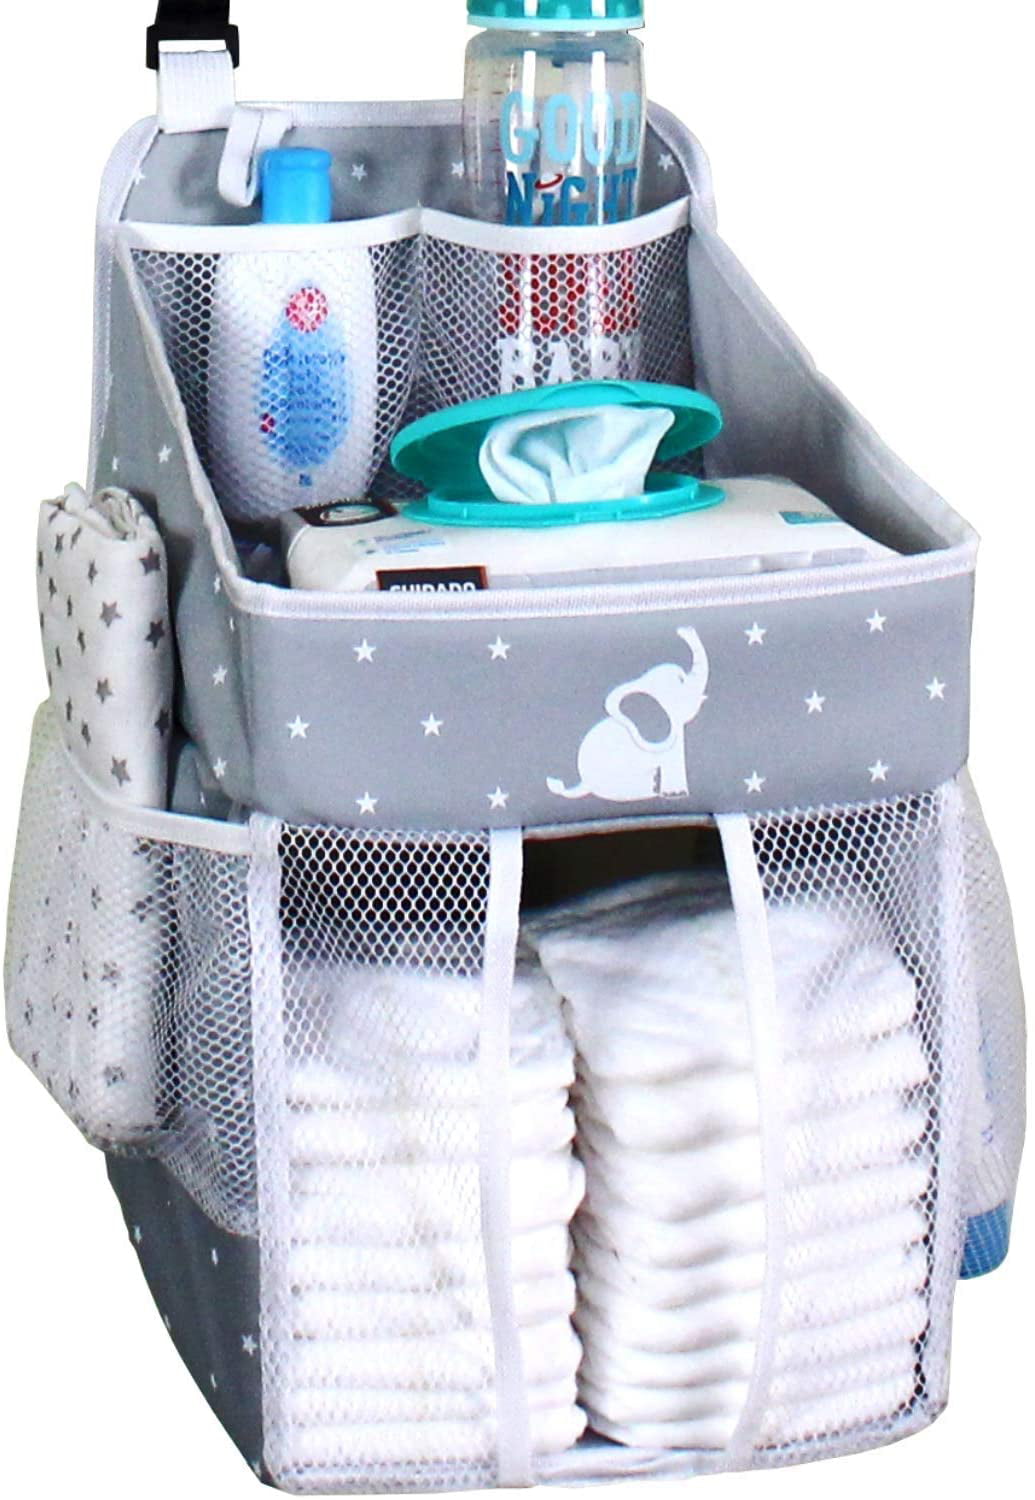 Hanging Diaper Caddy - Baby Diaper Organizer for Changing Table - Diaper Stacker for Crib, Playard or Wall - Newborn Boy and Girl Diaper Holder - Baby Shower Gifts - Elephant Gray - 17x9x9 inches